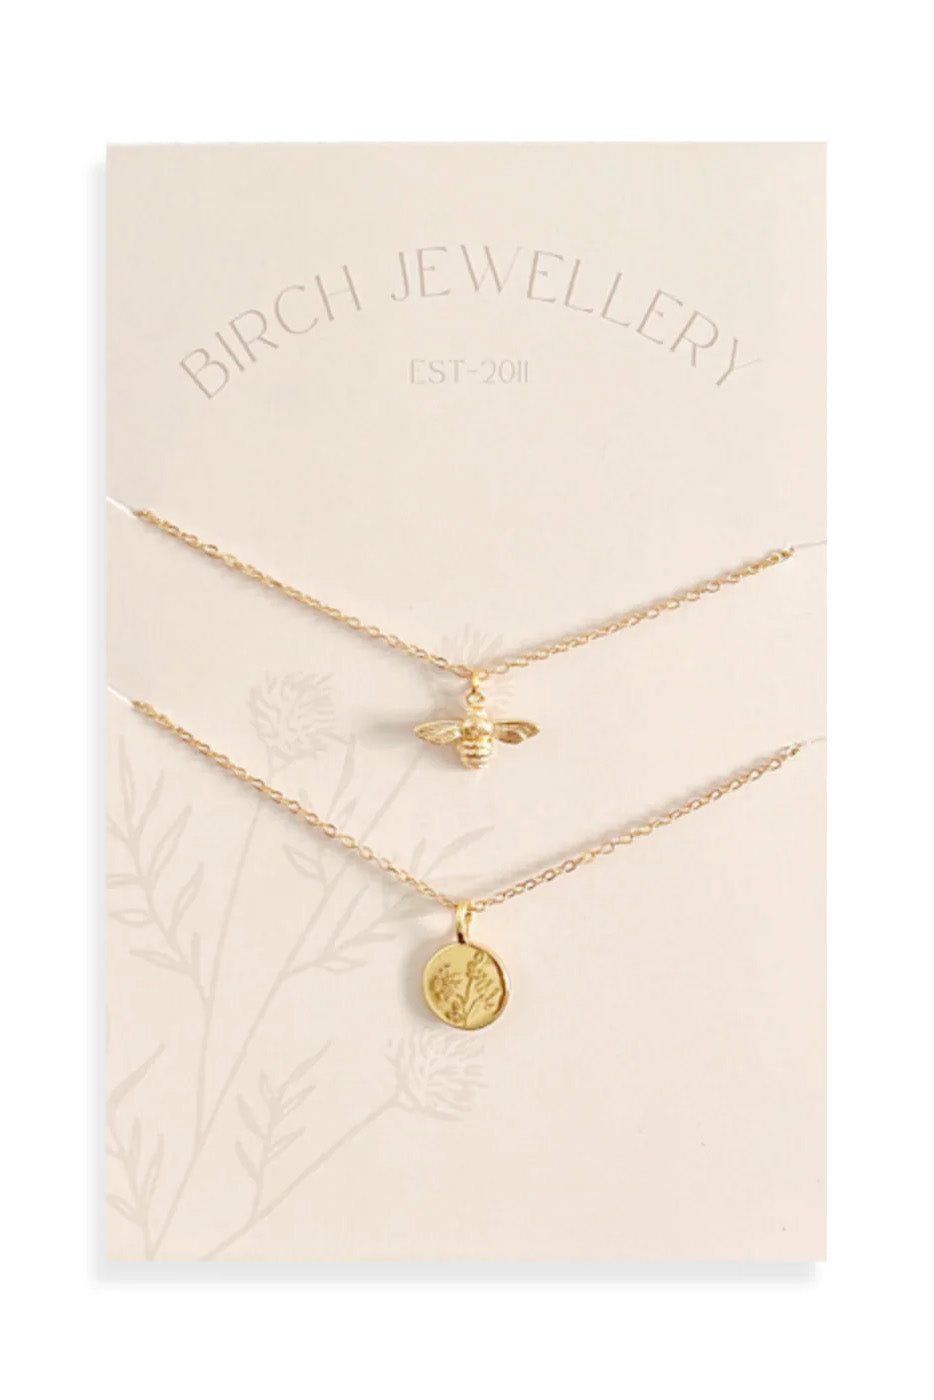 Bee and Wildflower Layering Set by Birch Jewellery, Gold, made in Ottawa